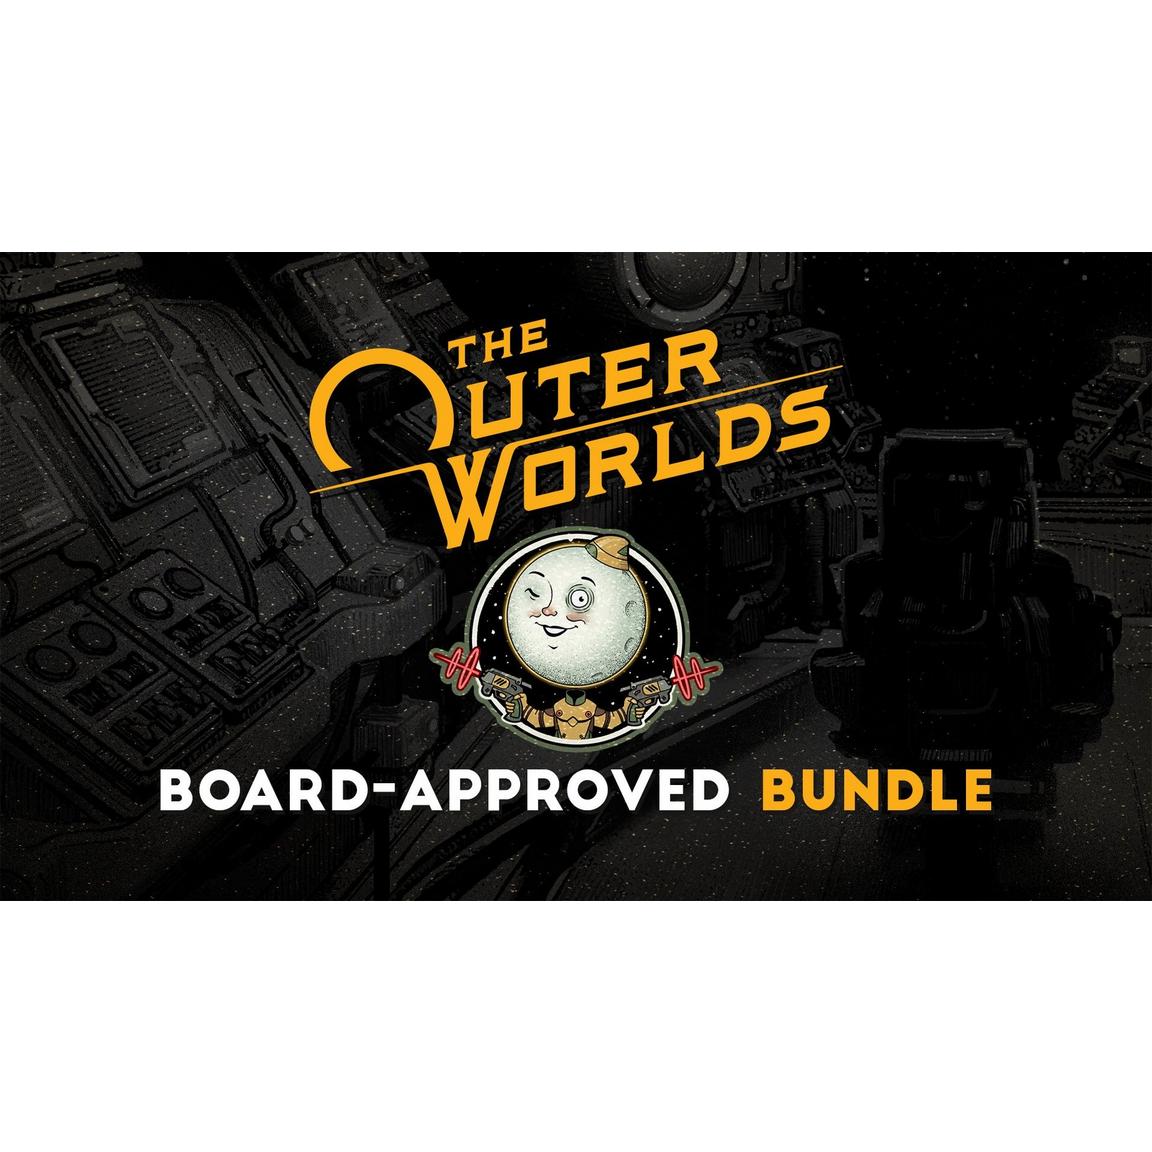 The Outer Worlds: Board-Approved Bundle - Nintendo Switch, Digital